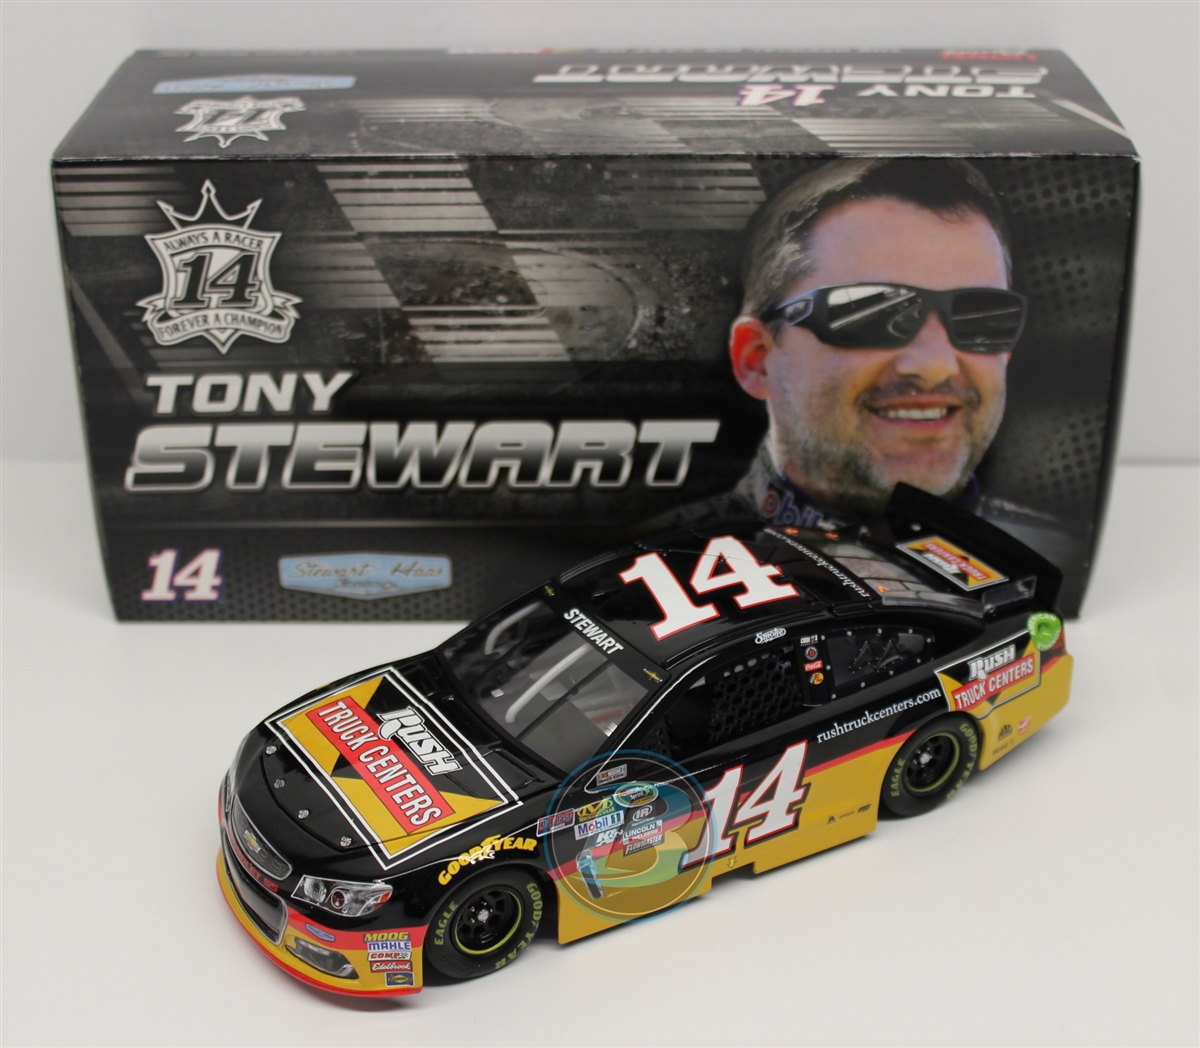 Lionel Racing C145821RTTS Tony Stewart #14 Rush Truck Centers 2015 Chevy SS 1:24 Scale ARC HOTO Official NASCAR Diecast Car 